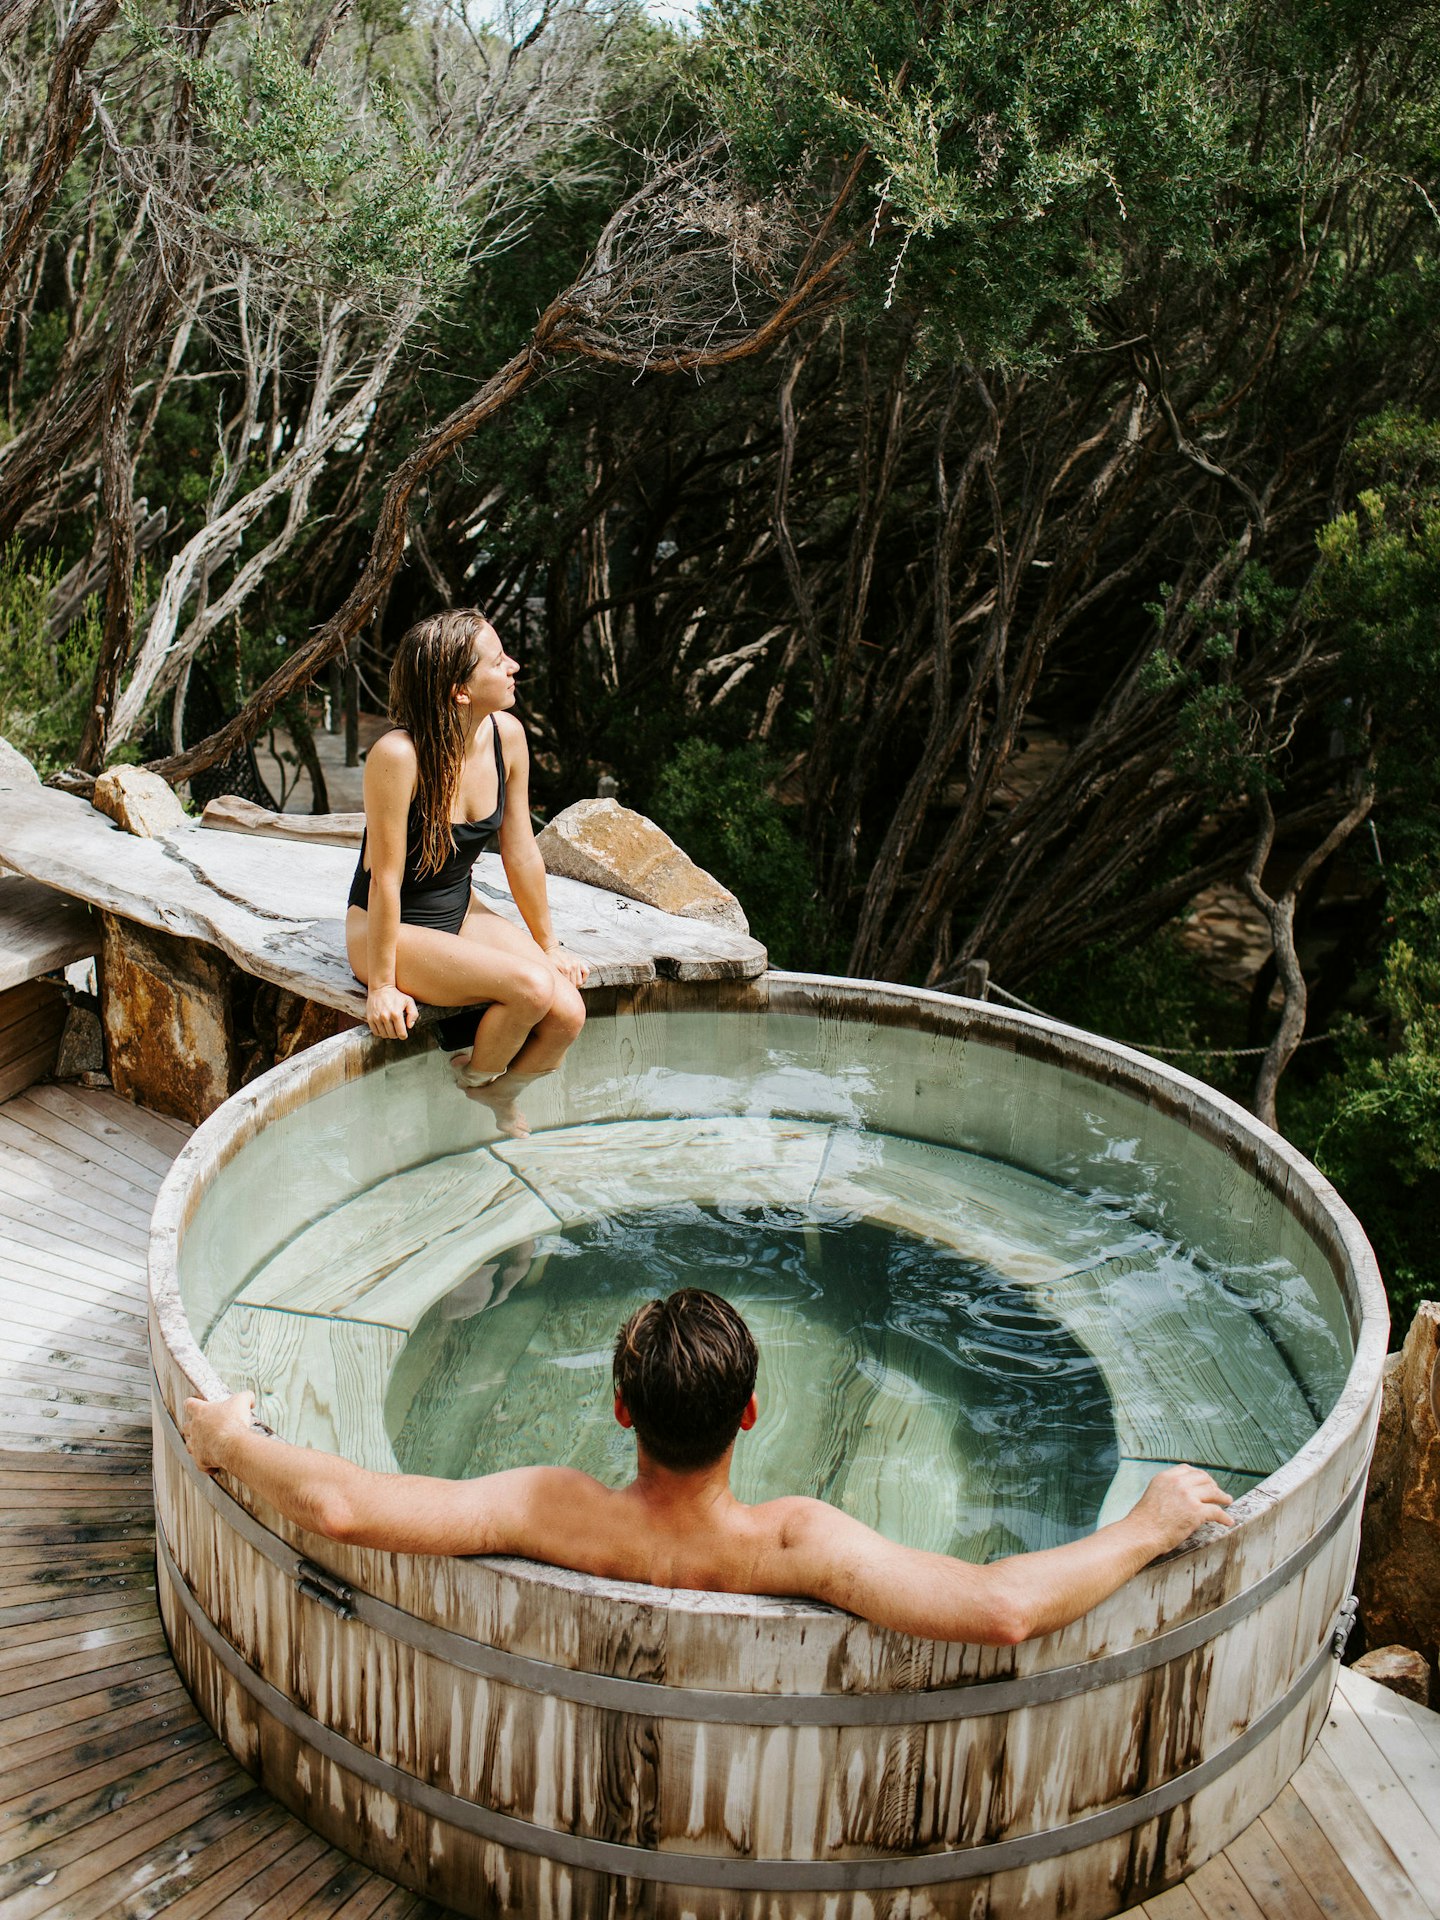 man sitting in barrel pool and woman sitting on edge looking out at trees